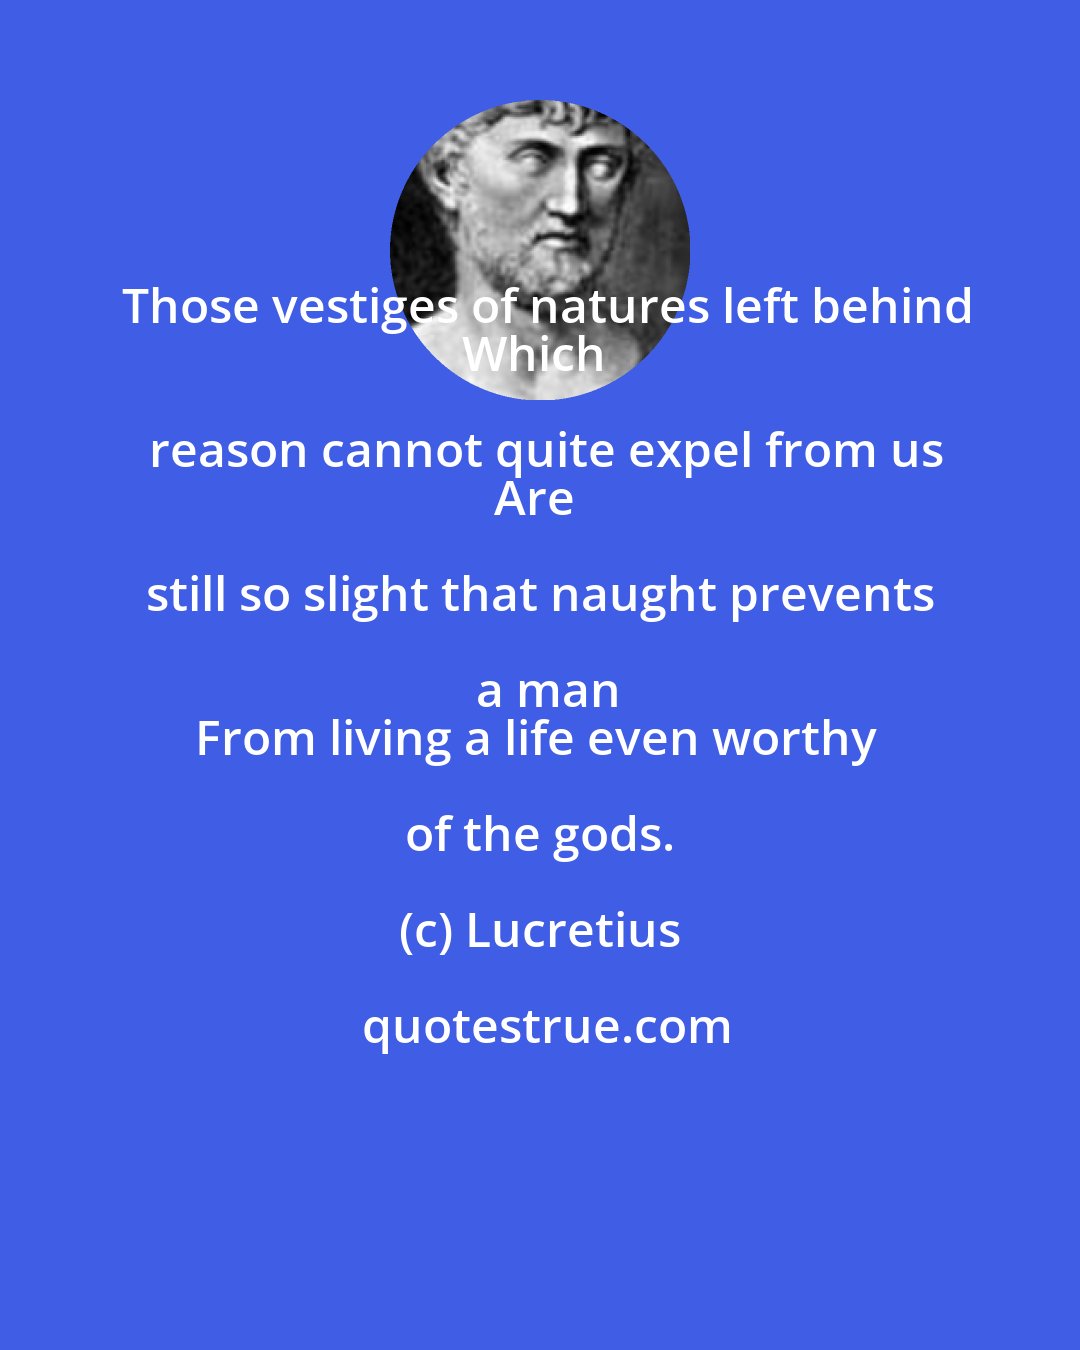 Lucretius: Those vestiges of natures left behind
Which reason cannot quite expel from us
Are still so slight that naught prevents a man
From living a life even worthy of the gods.